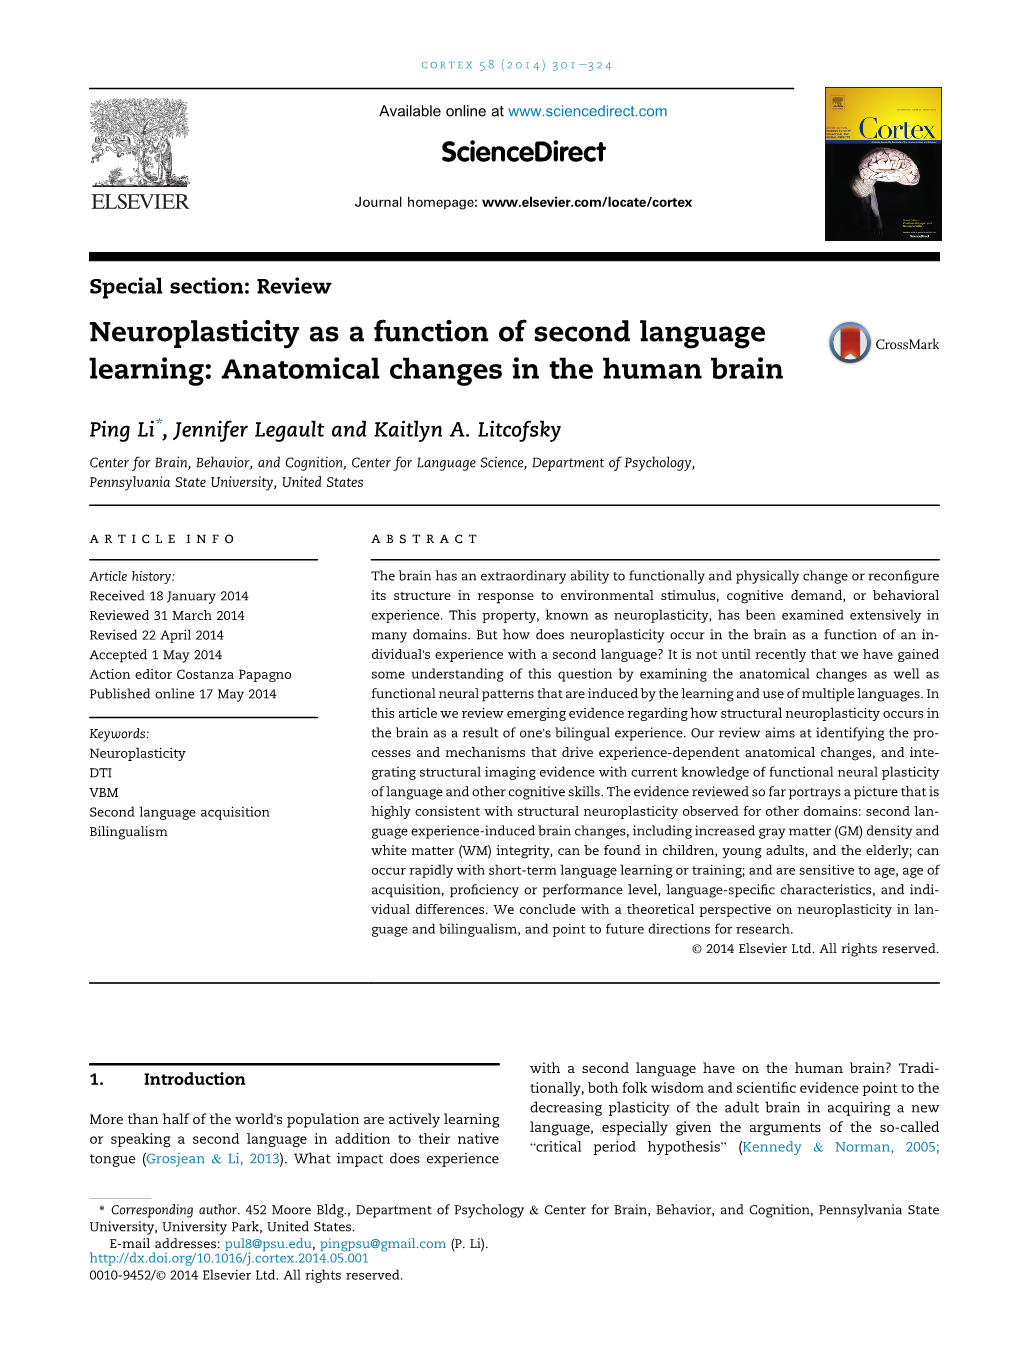 Neuroplasticity As a Function of Second Language Learning: Anatomical Changes in the Human Brain